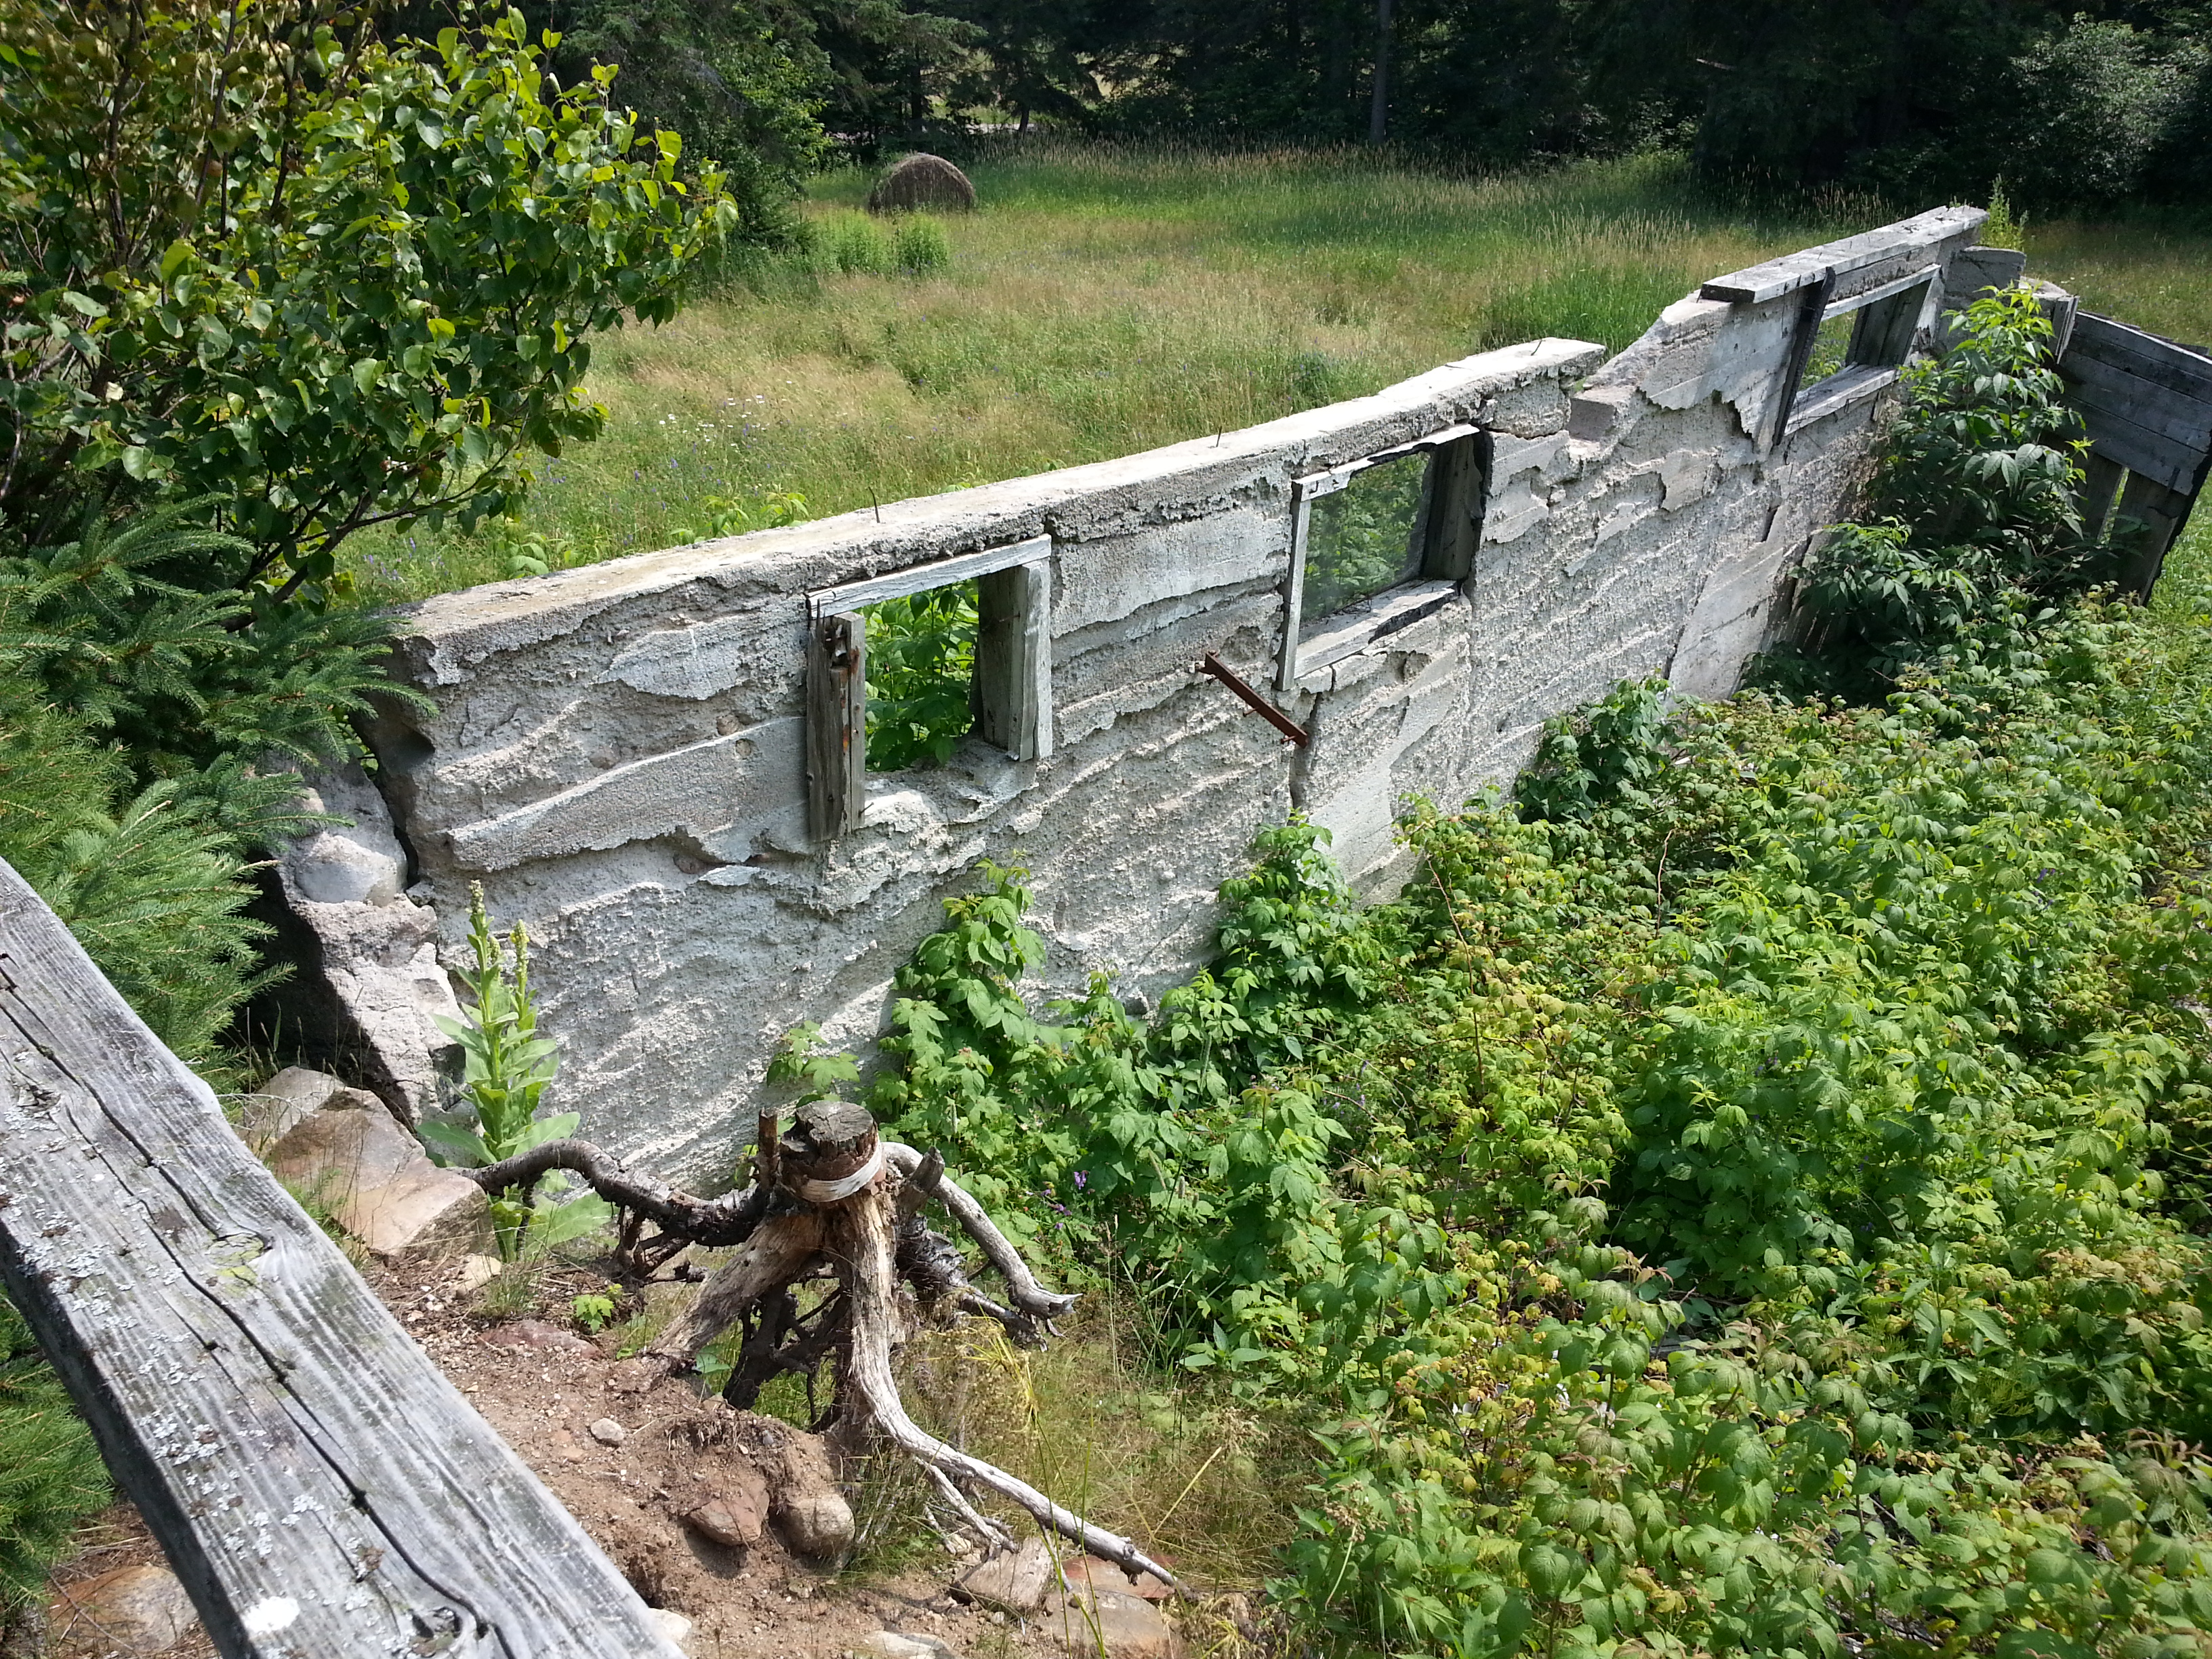 crumbled stone remnants of the barn at Lornie Bell's farm in Spence, Ontario; a low stone wall with 3 windows in it, surrounded by green underbrush and forest